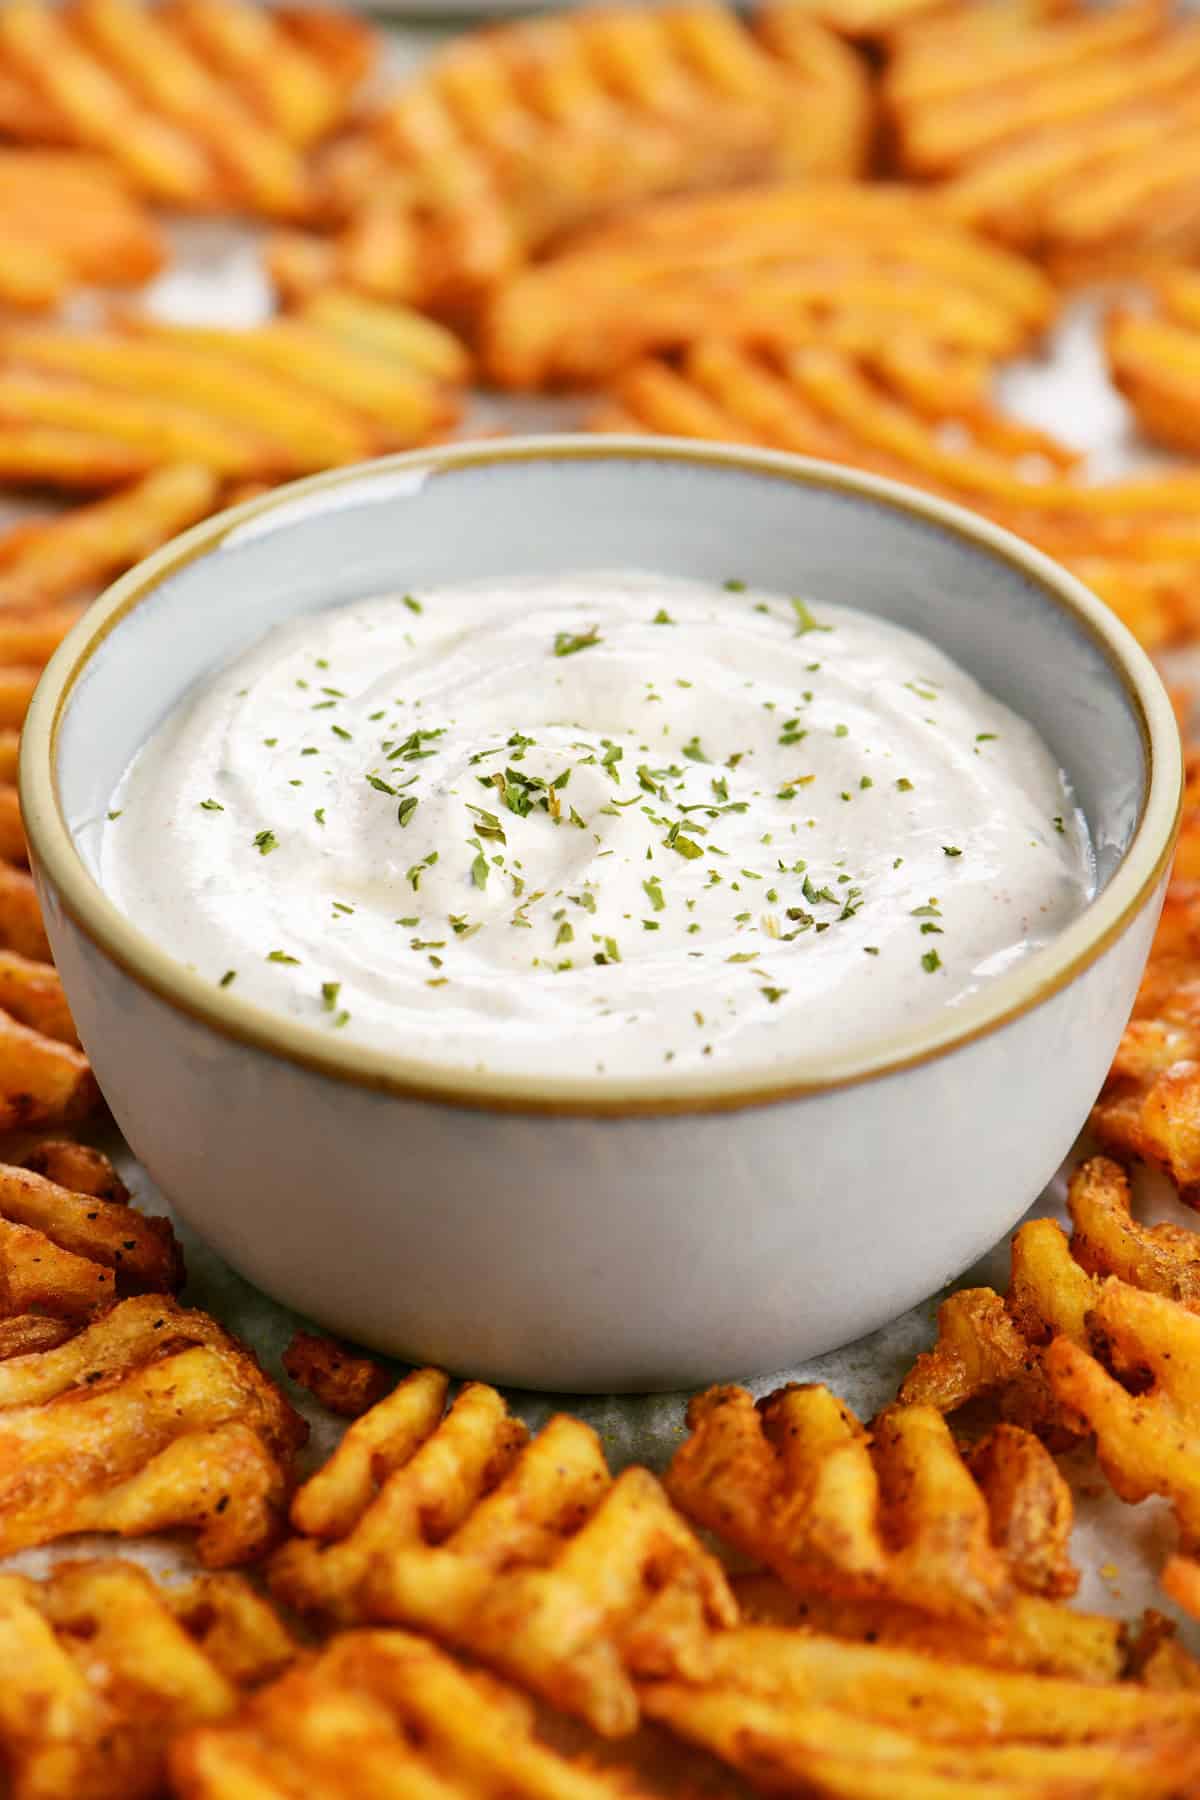 Seasoned sour cream in a gray bowl surrounded by waffle fries.